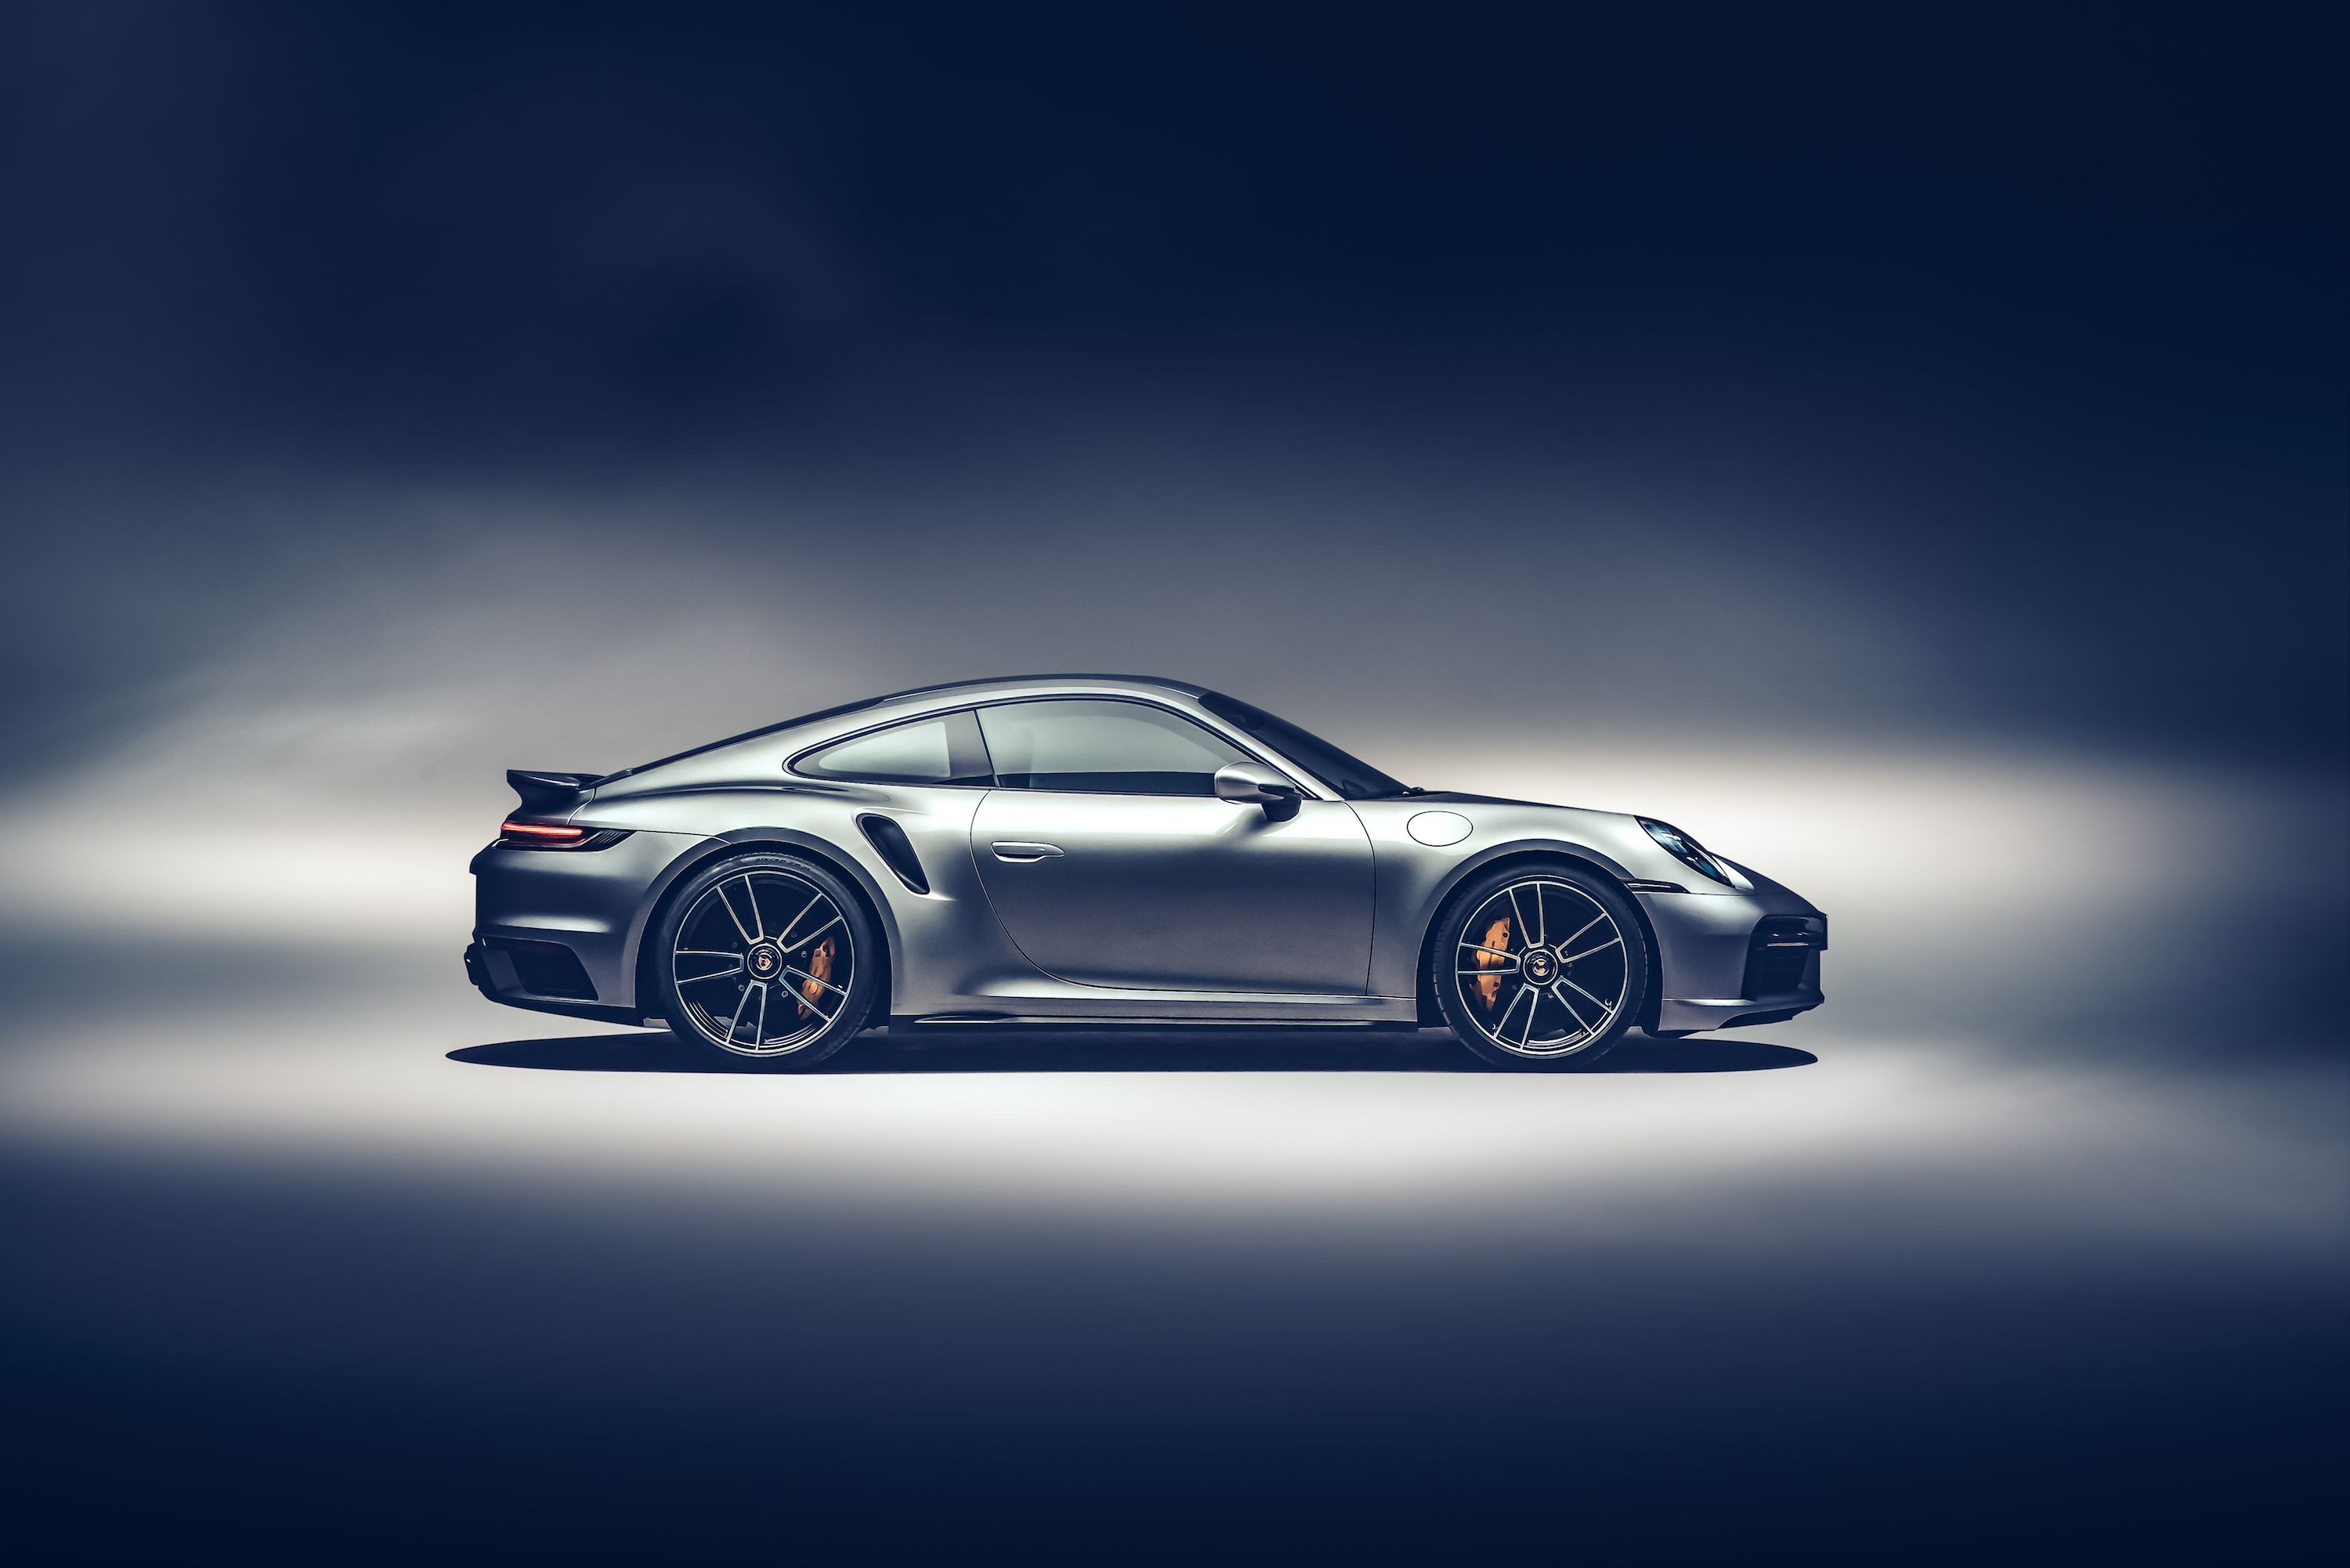 The 2021 Porsche 911 Turbo S Is a 640-HP Monster